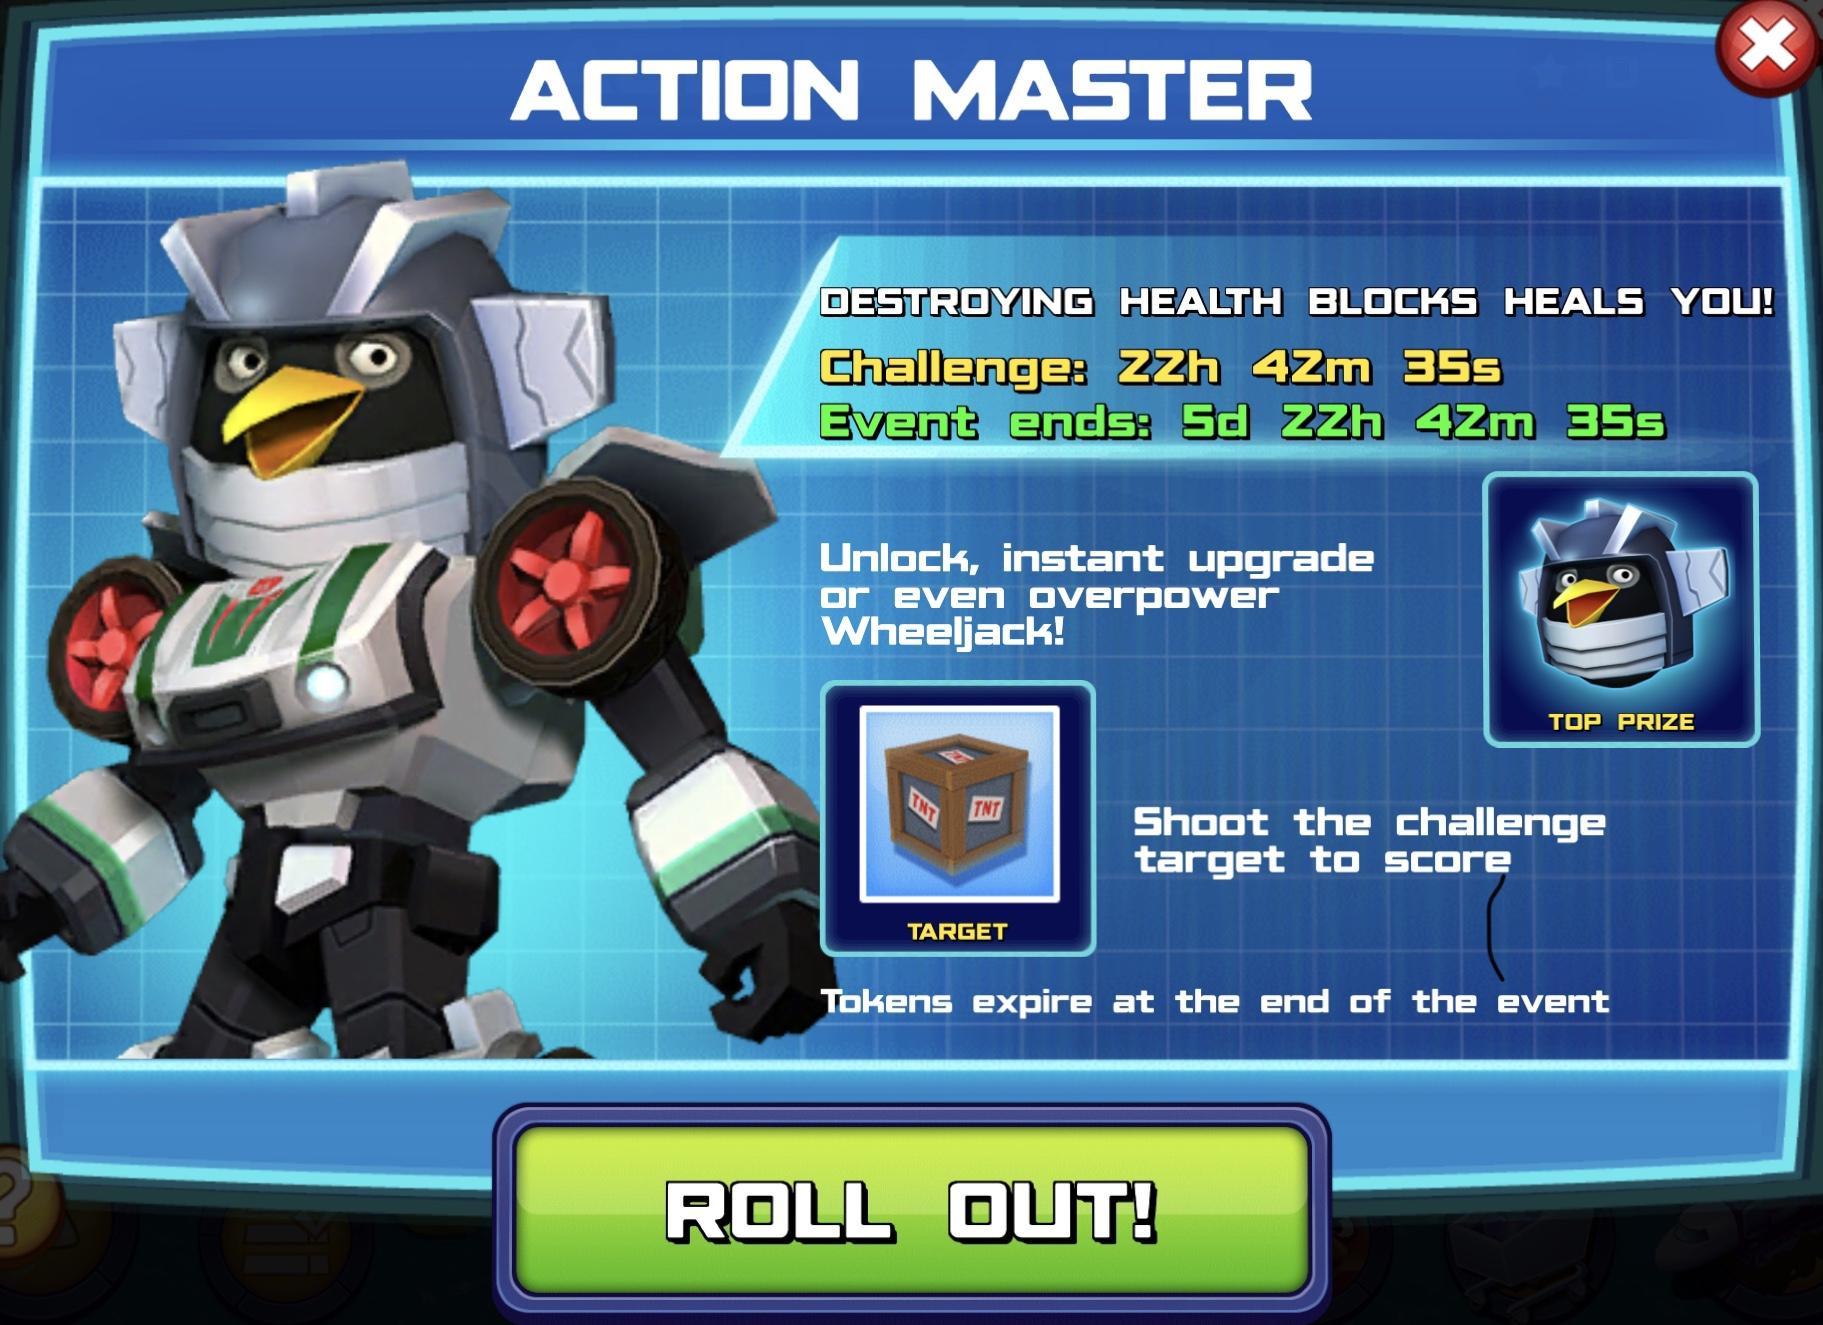 Action Master Event Banner